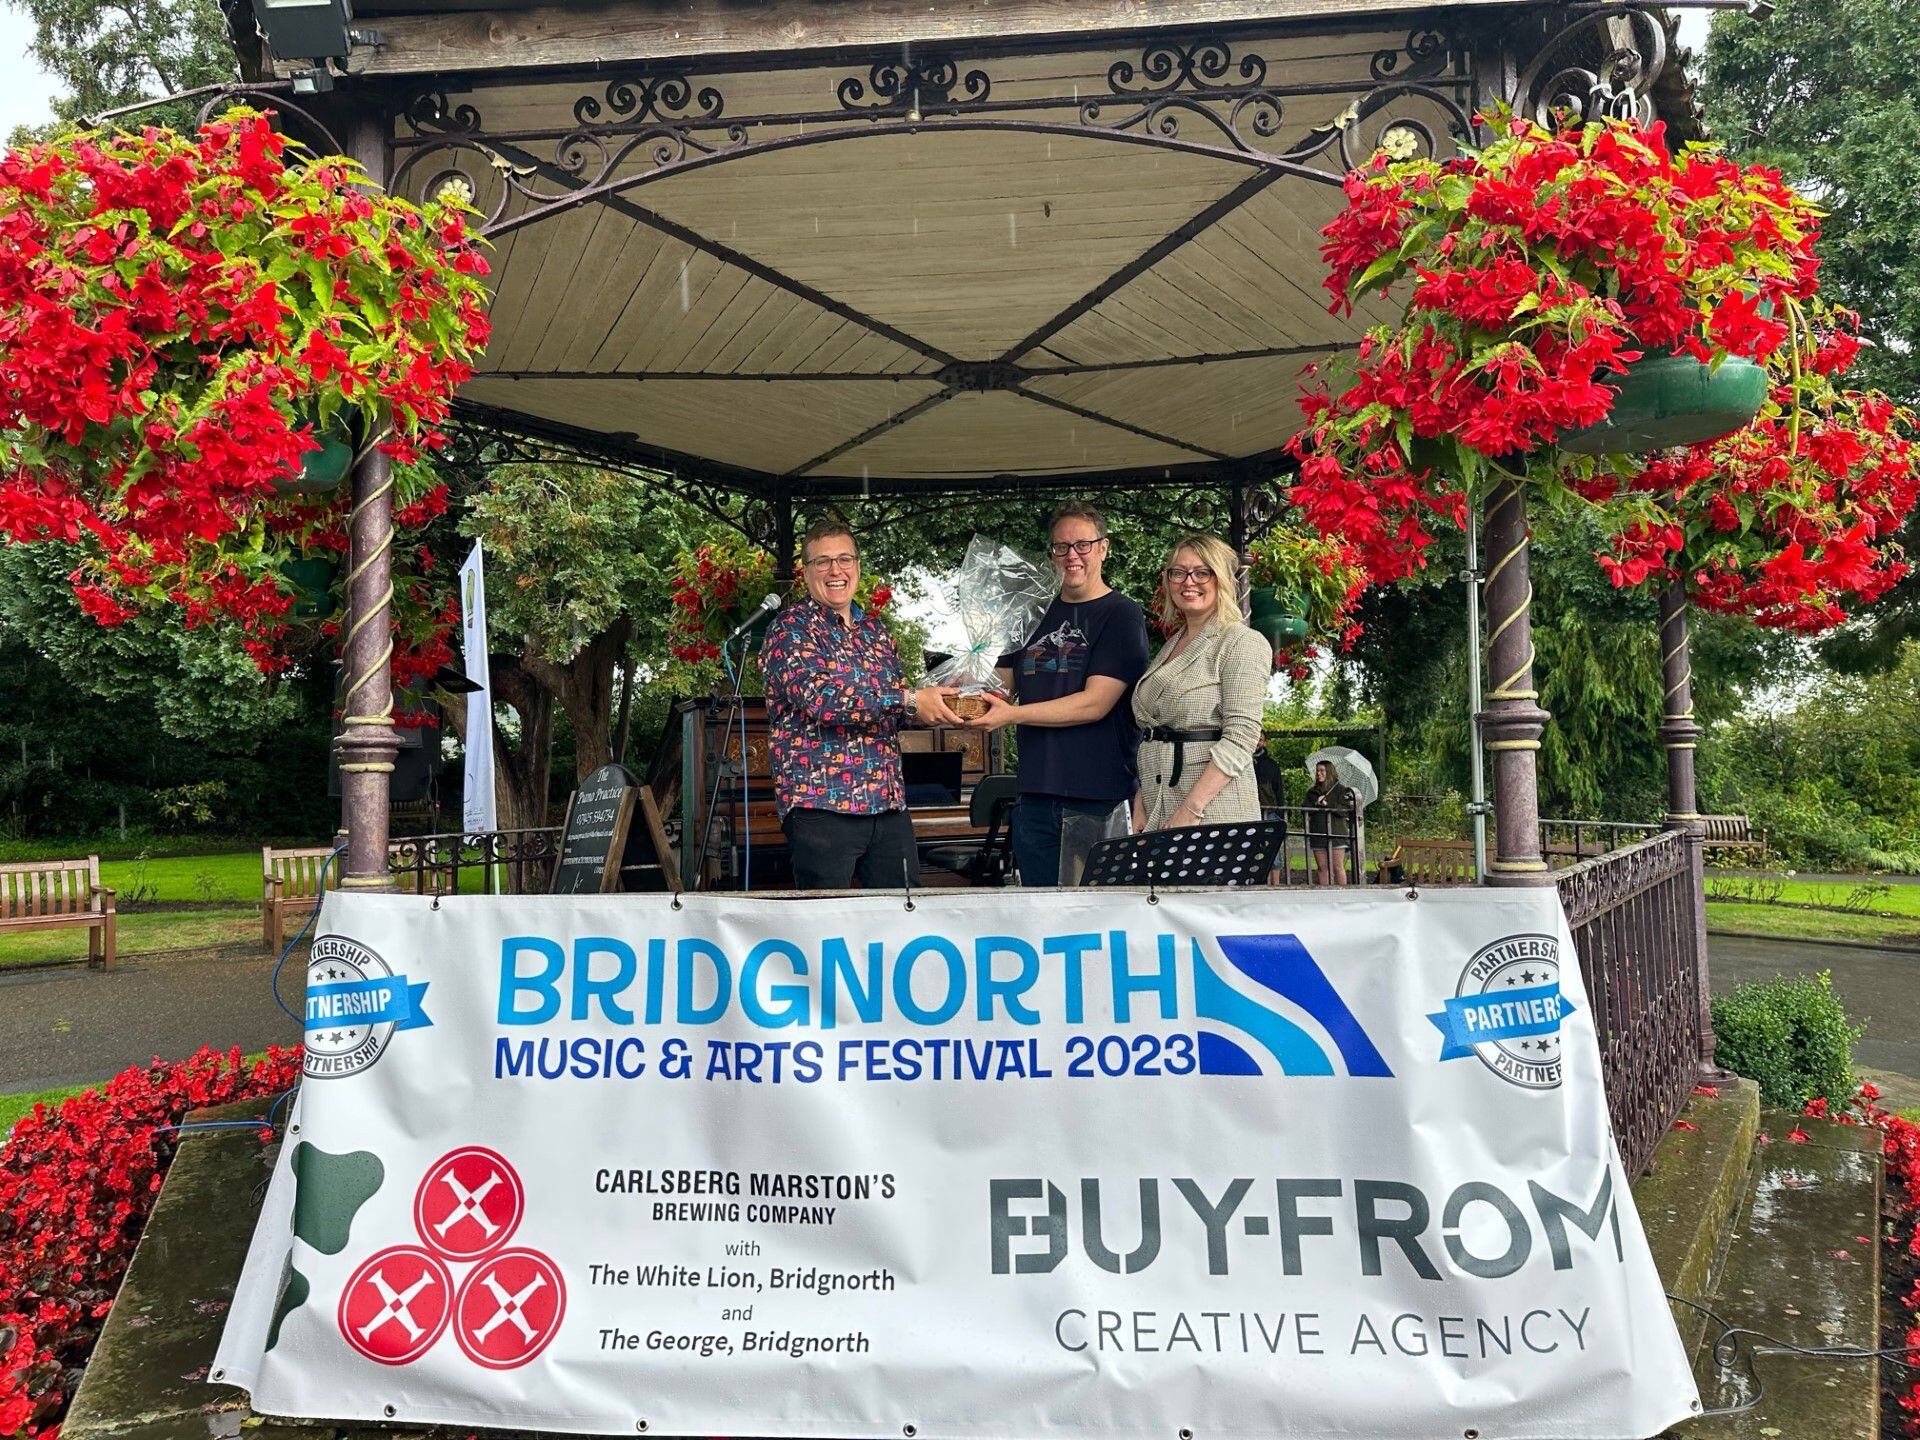 Brainboxes star in Bridgnorth as festival enters its third day